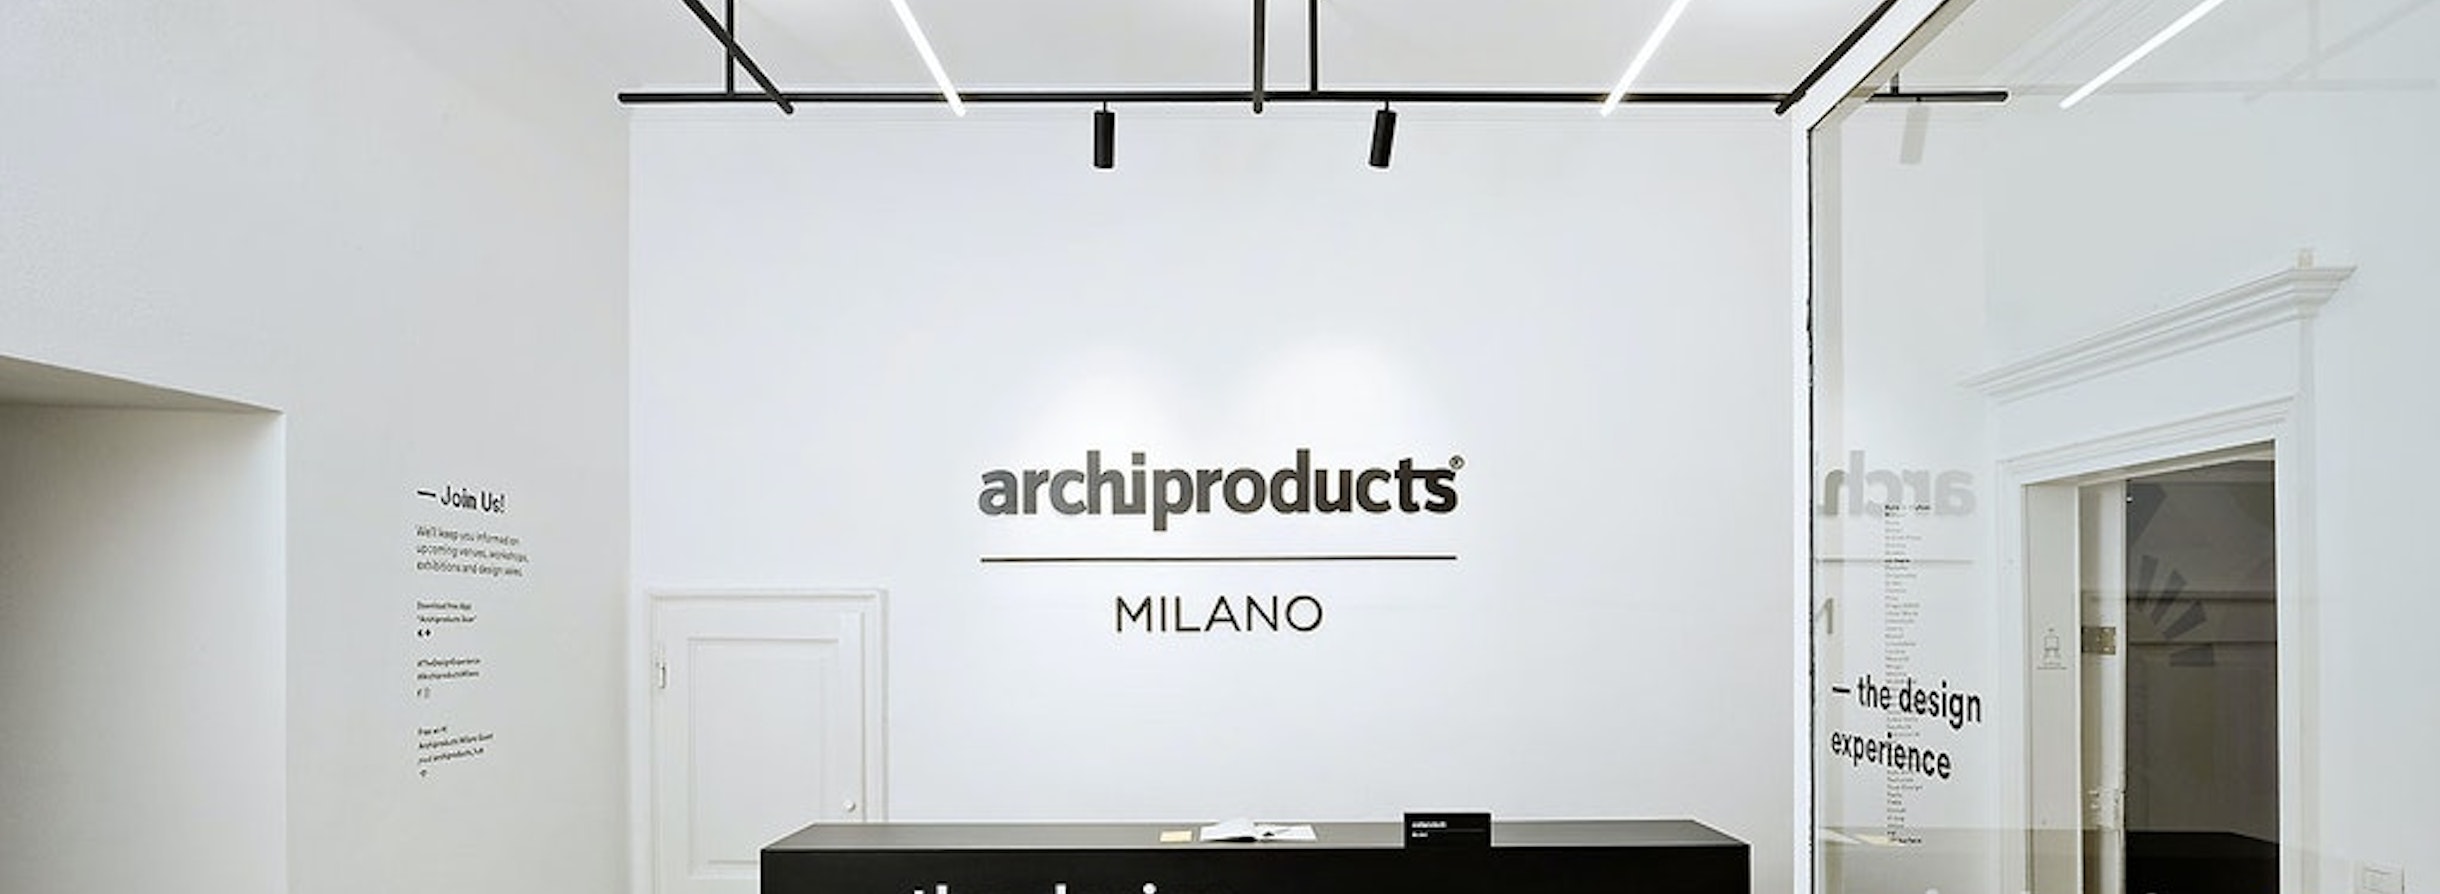 offices-archiproducts-milano-flos-03-1440x840-1